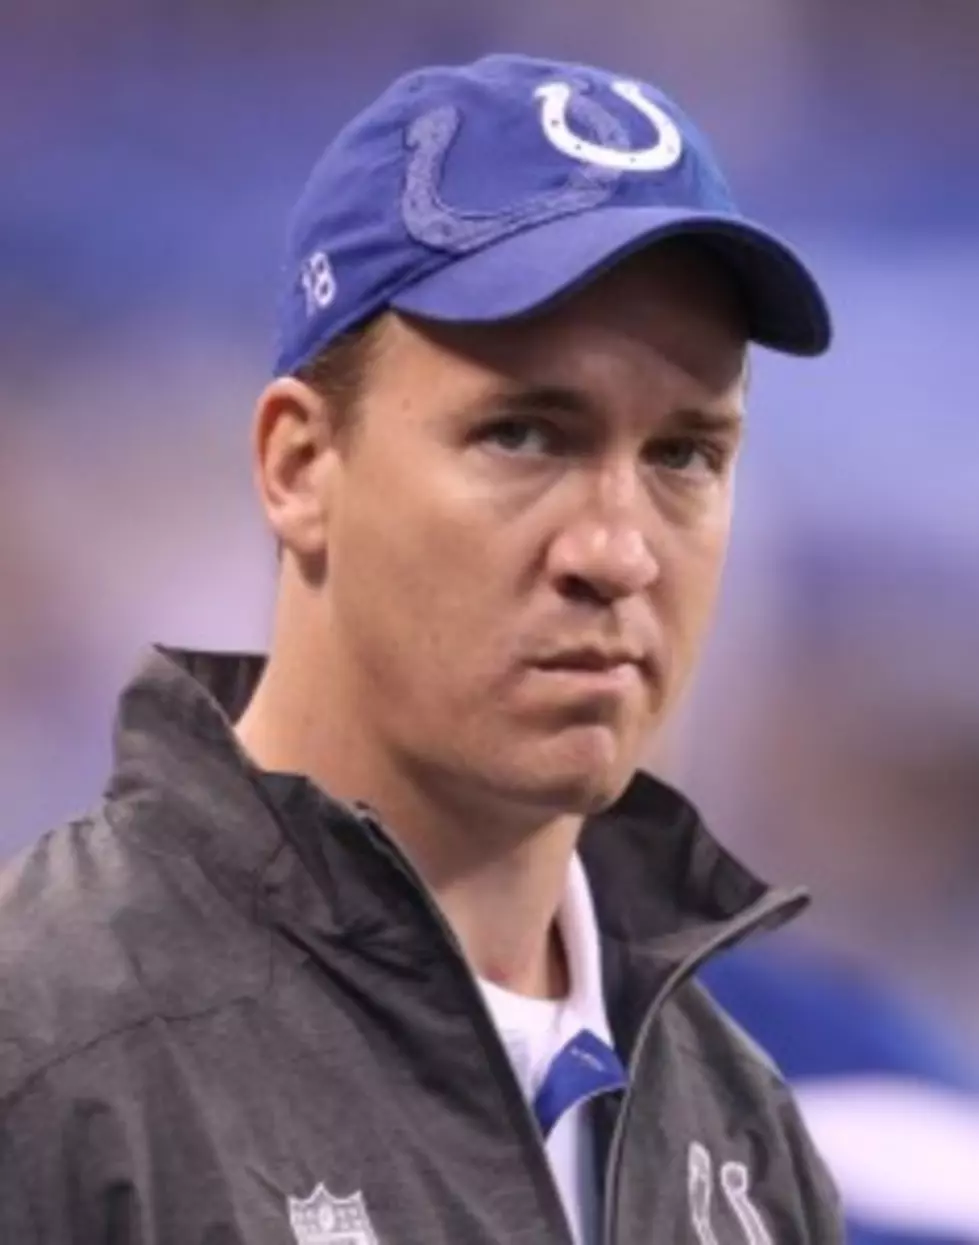 Indianapolis Colts Will Officially Release Peyton Manning On Eve Of $28 Million Bonus